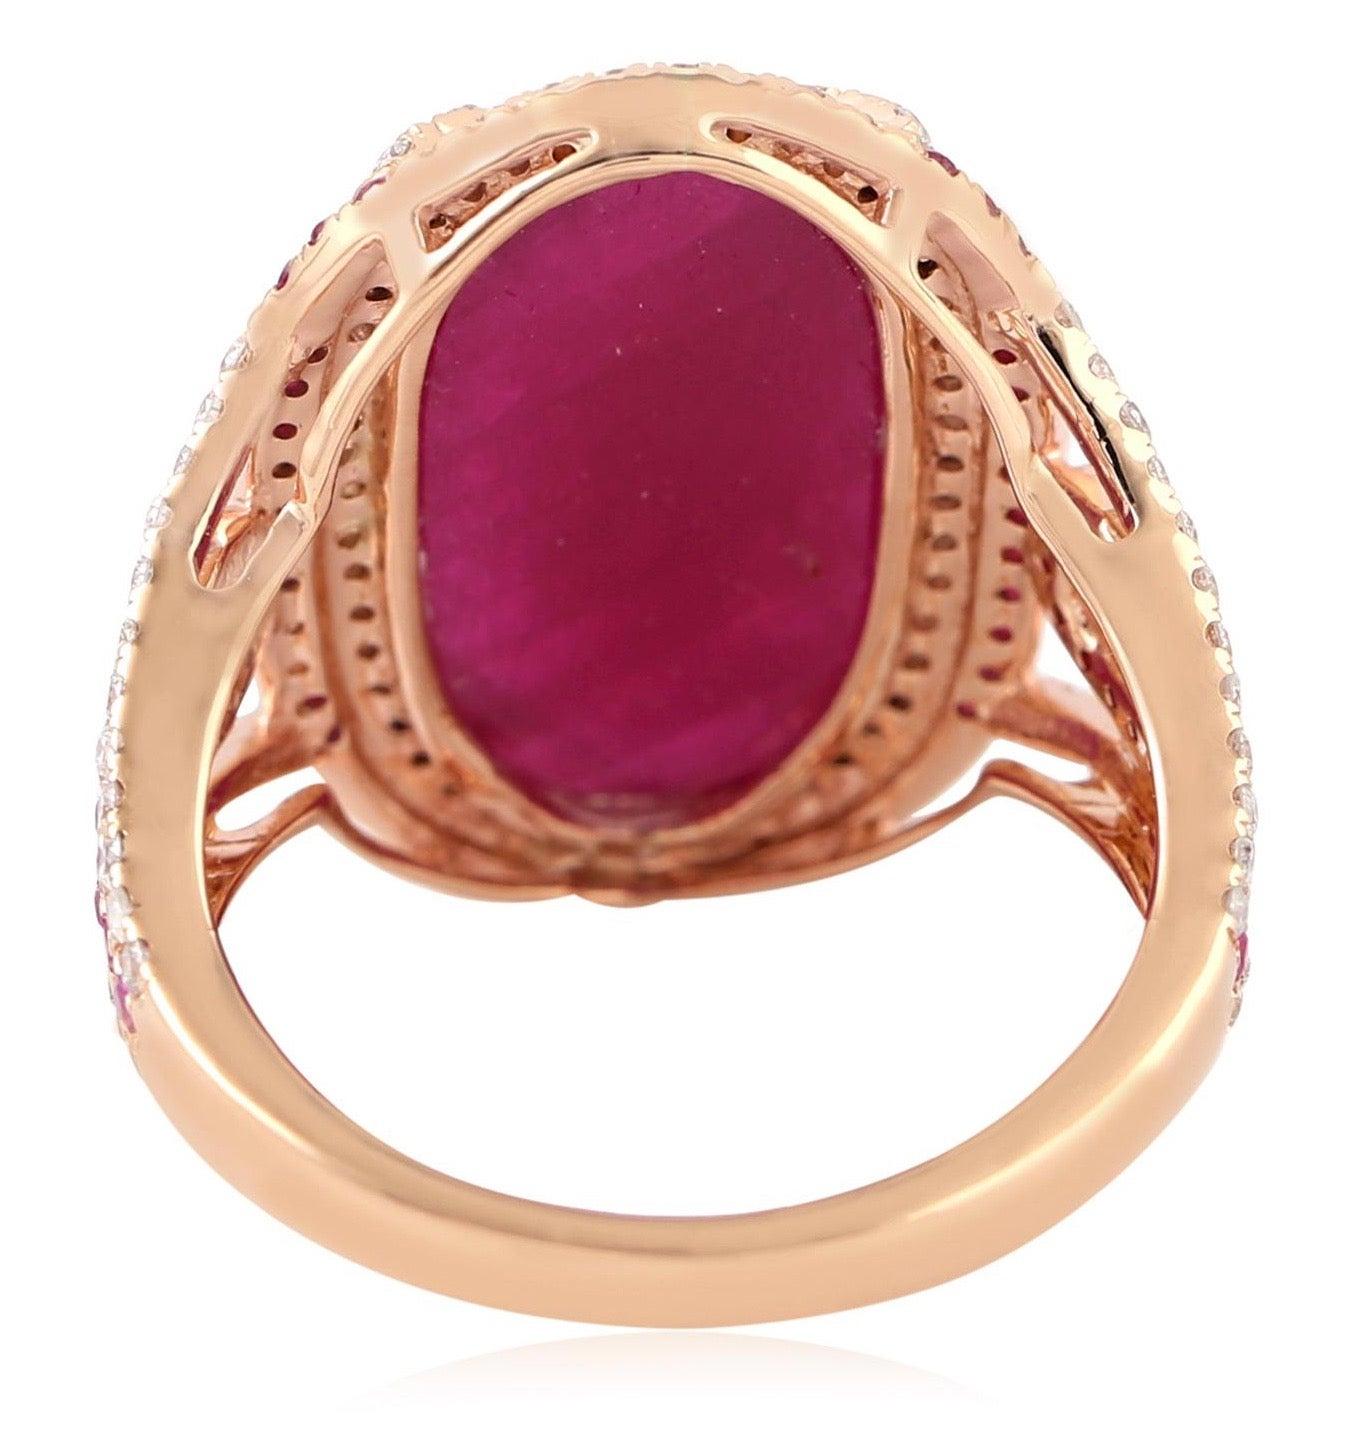 For Sale:  11.67 Carat Ruby Diamond Cocktail Ring 4